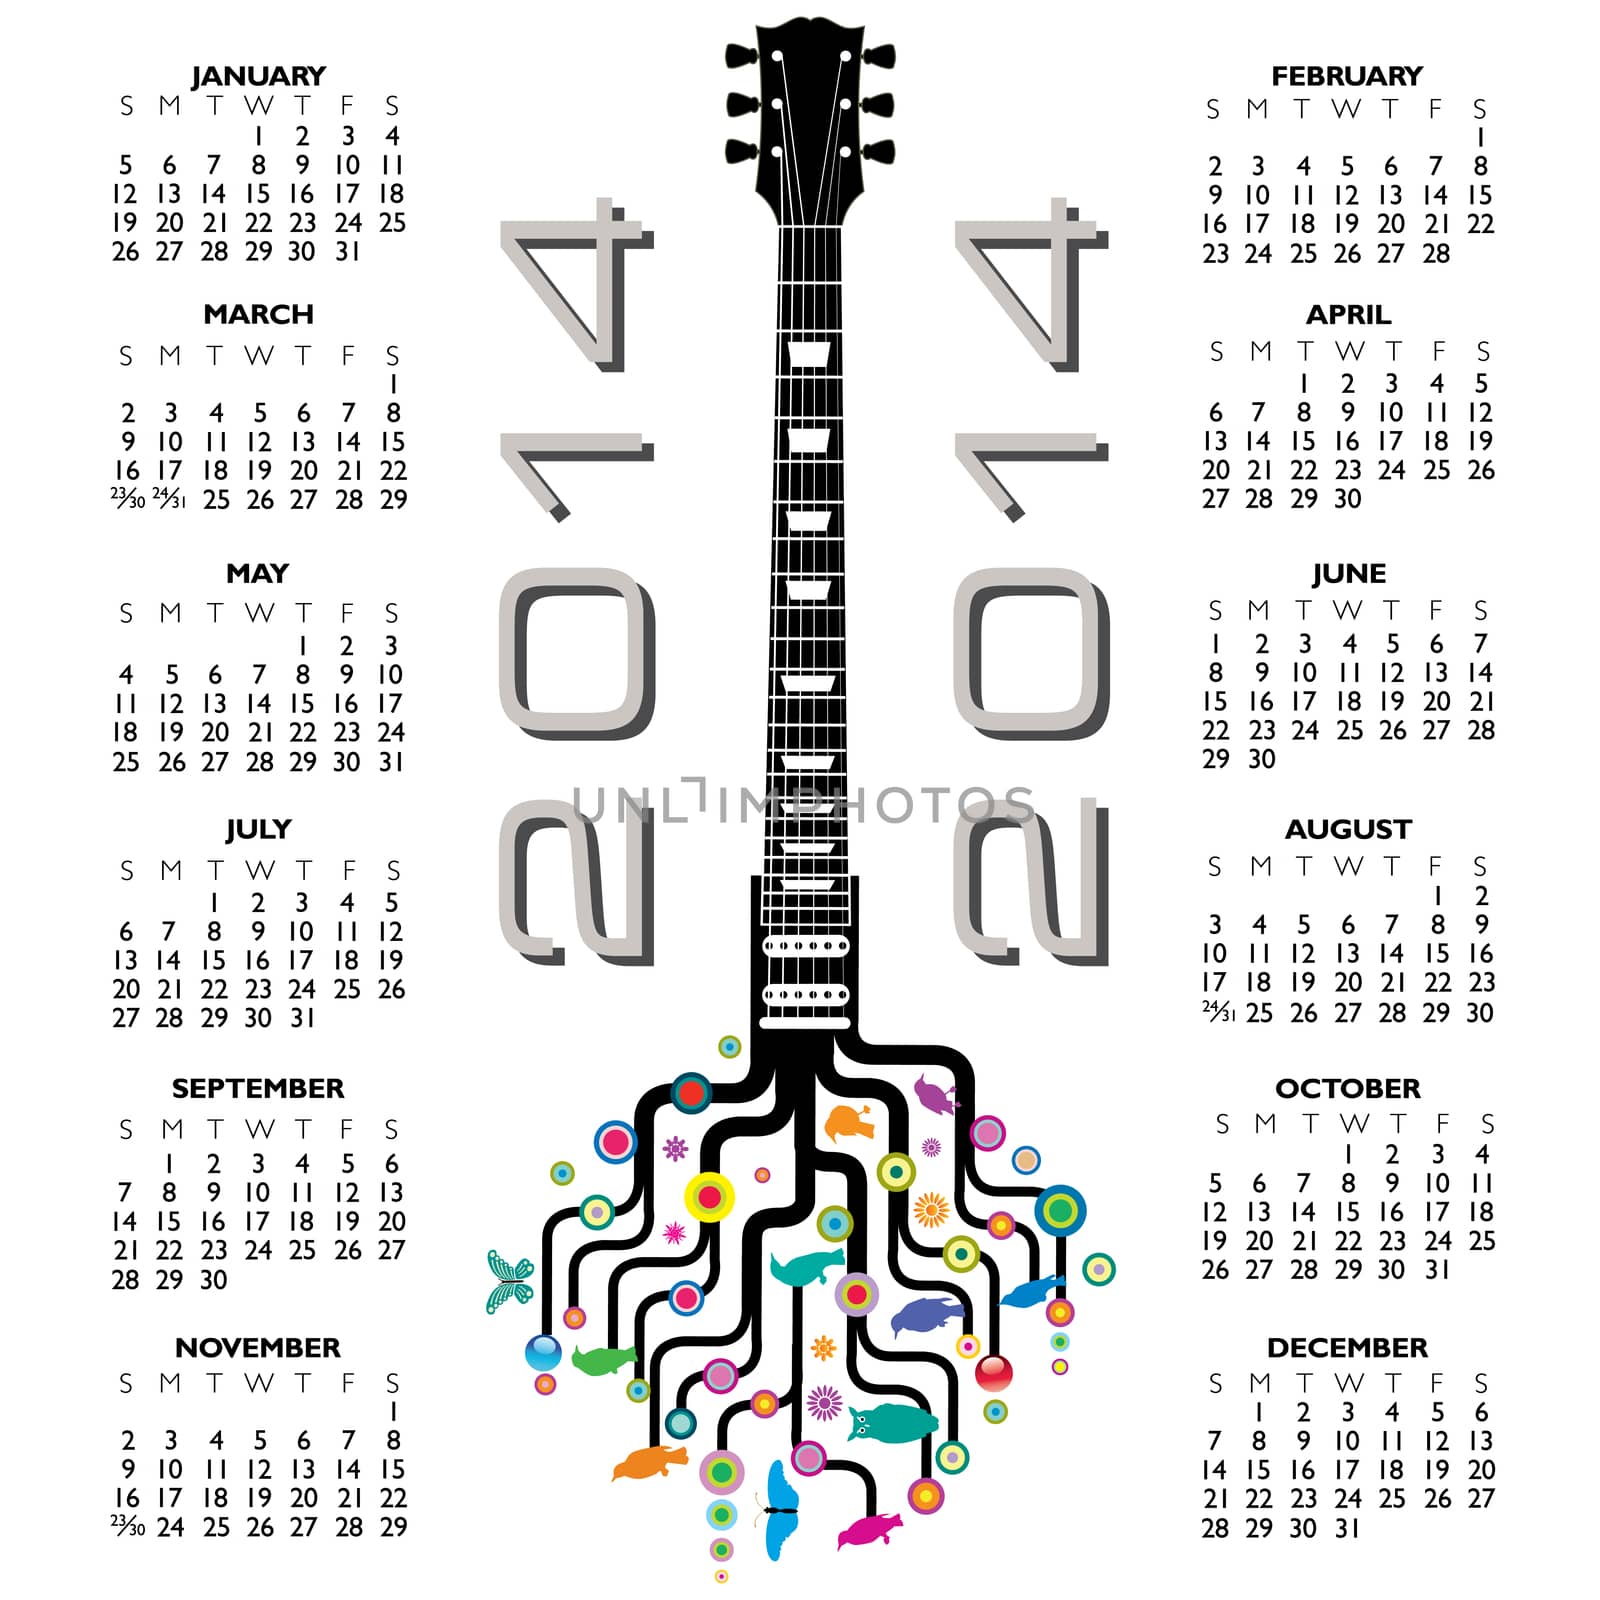 2014 Creative Calendar for Print or Web by mike301